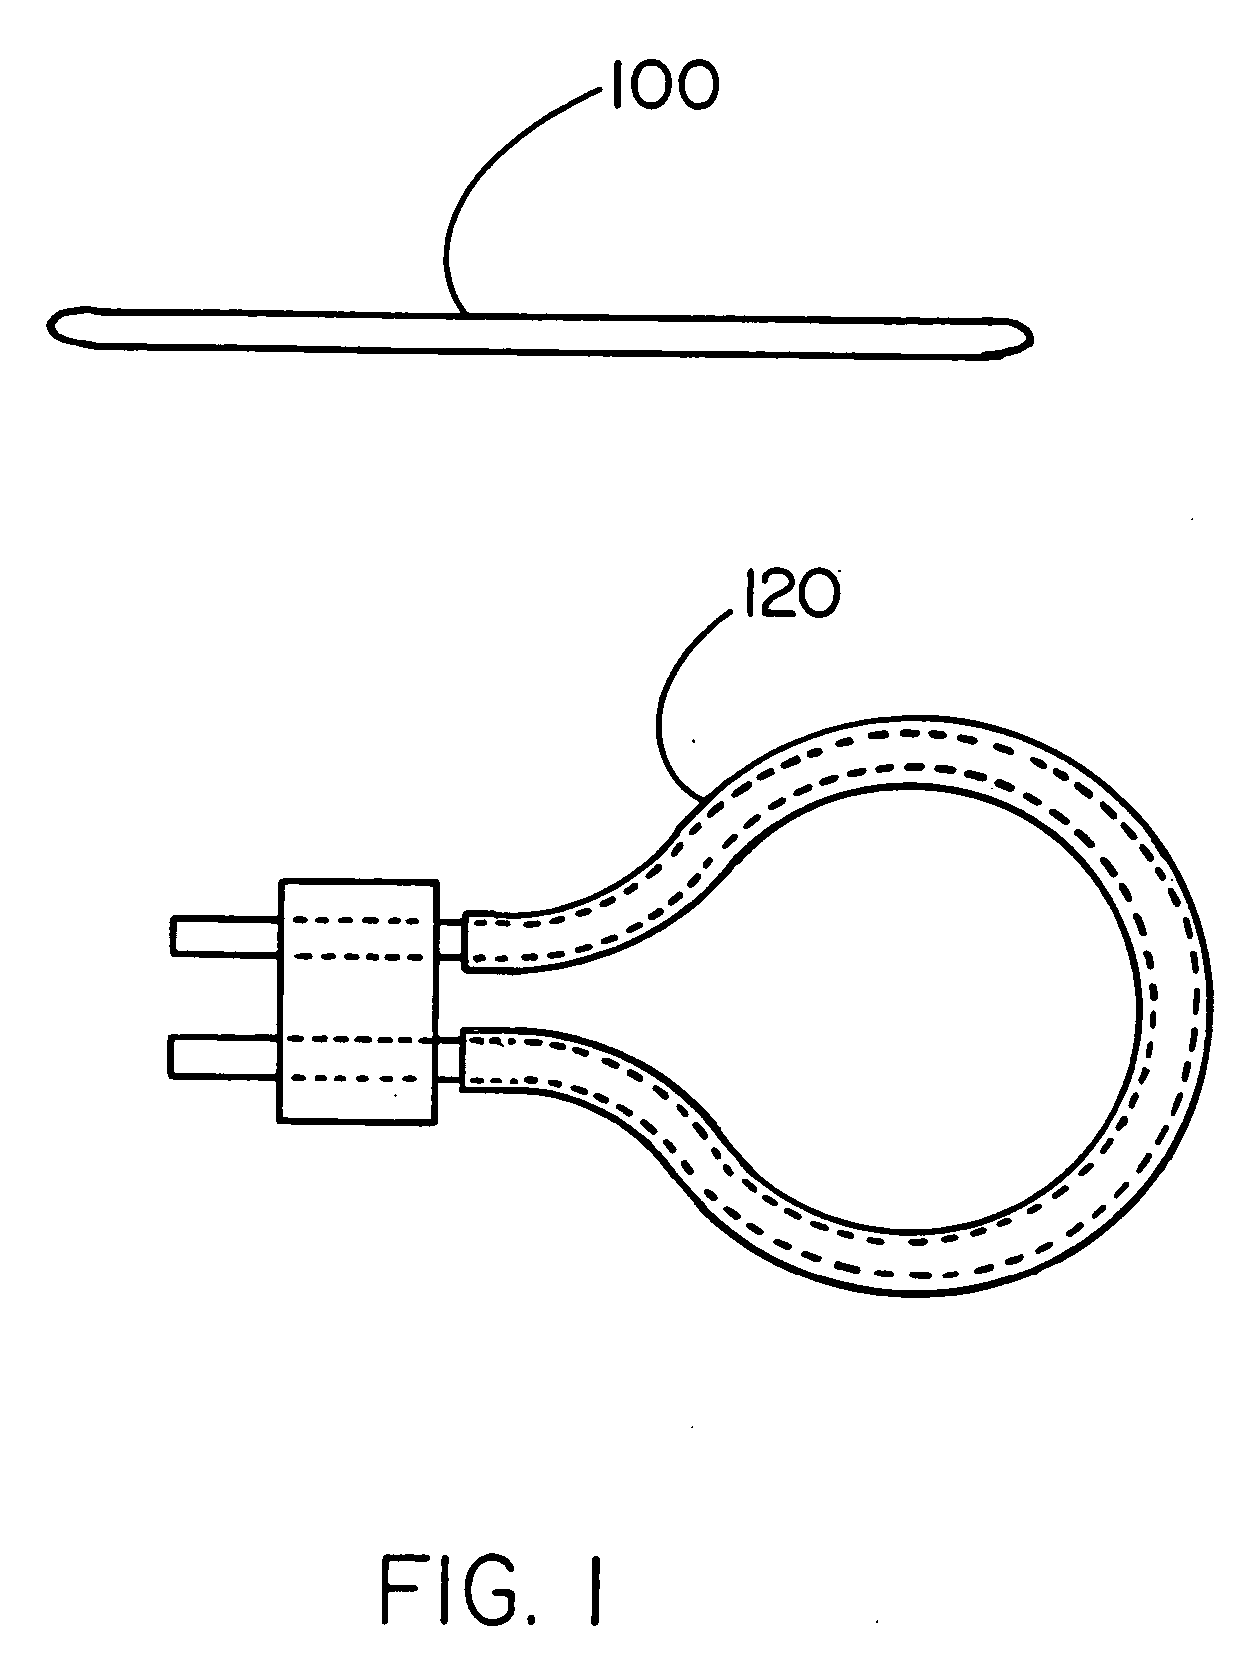 Cell or drug encapsulation device having a wet seal